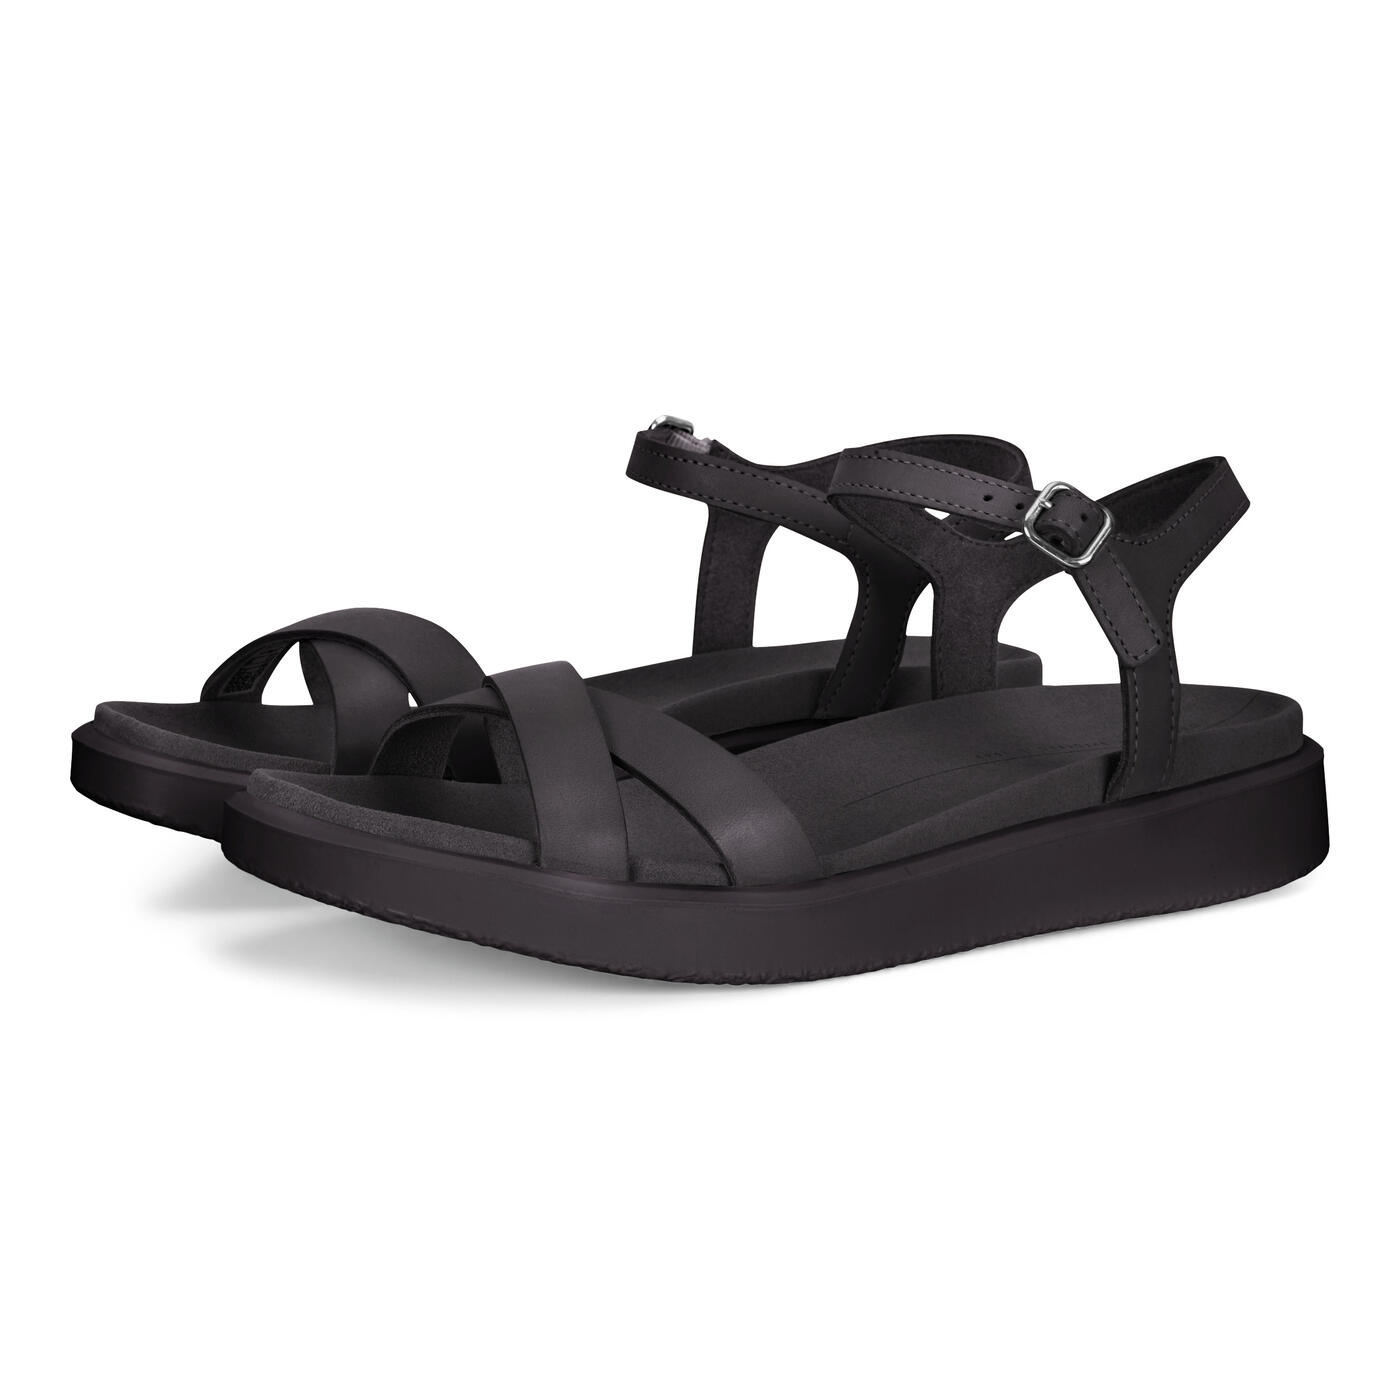 Women's YUMA Crossover Stap Sandals | ECCO® Shoes